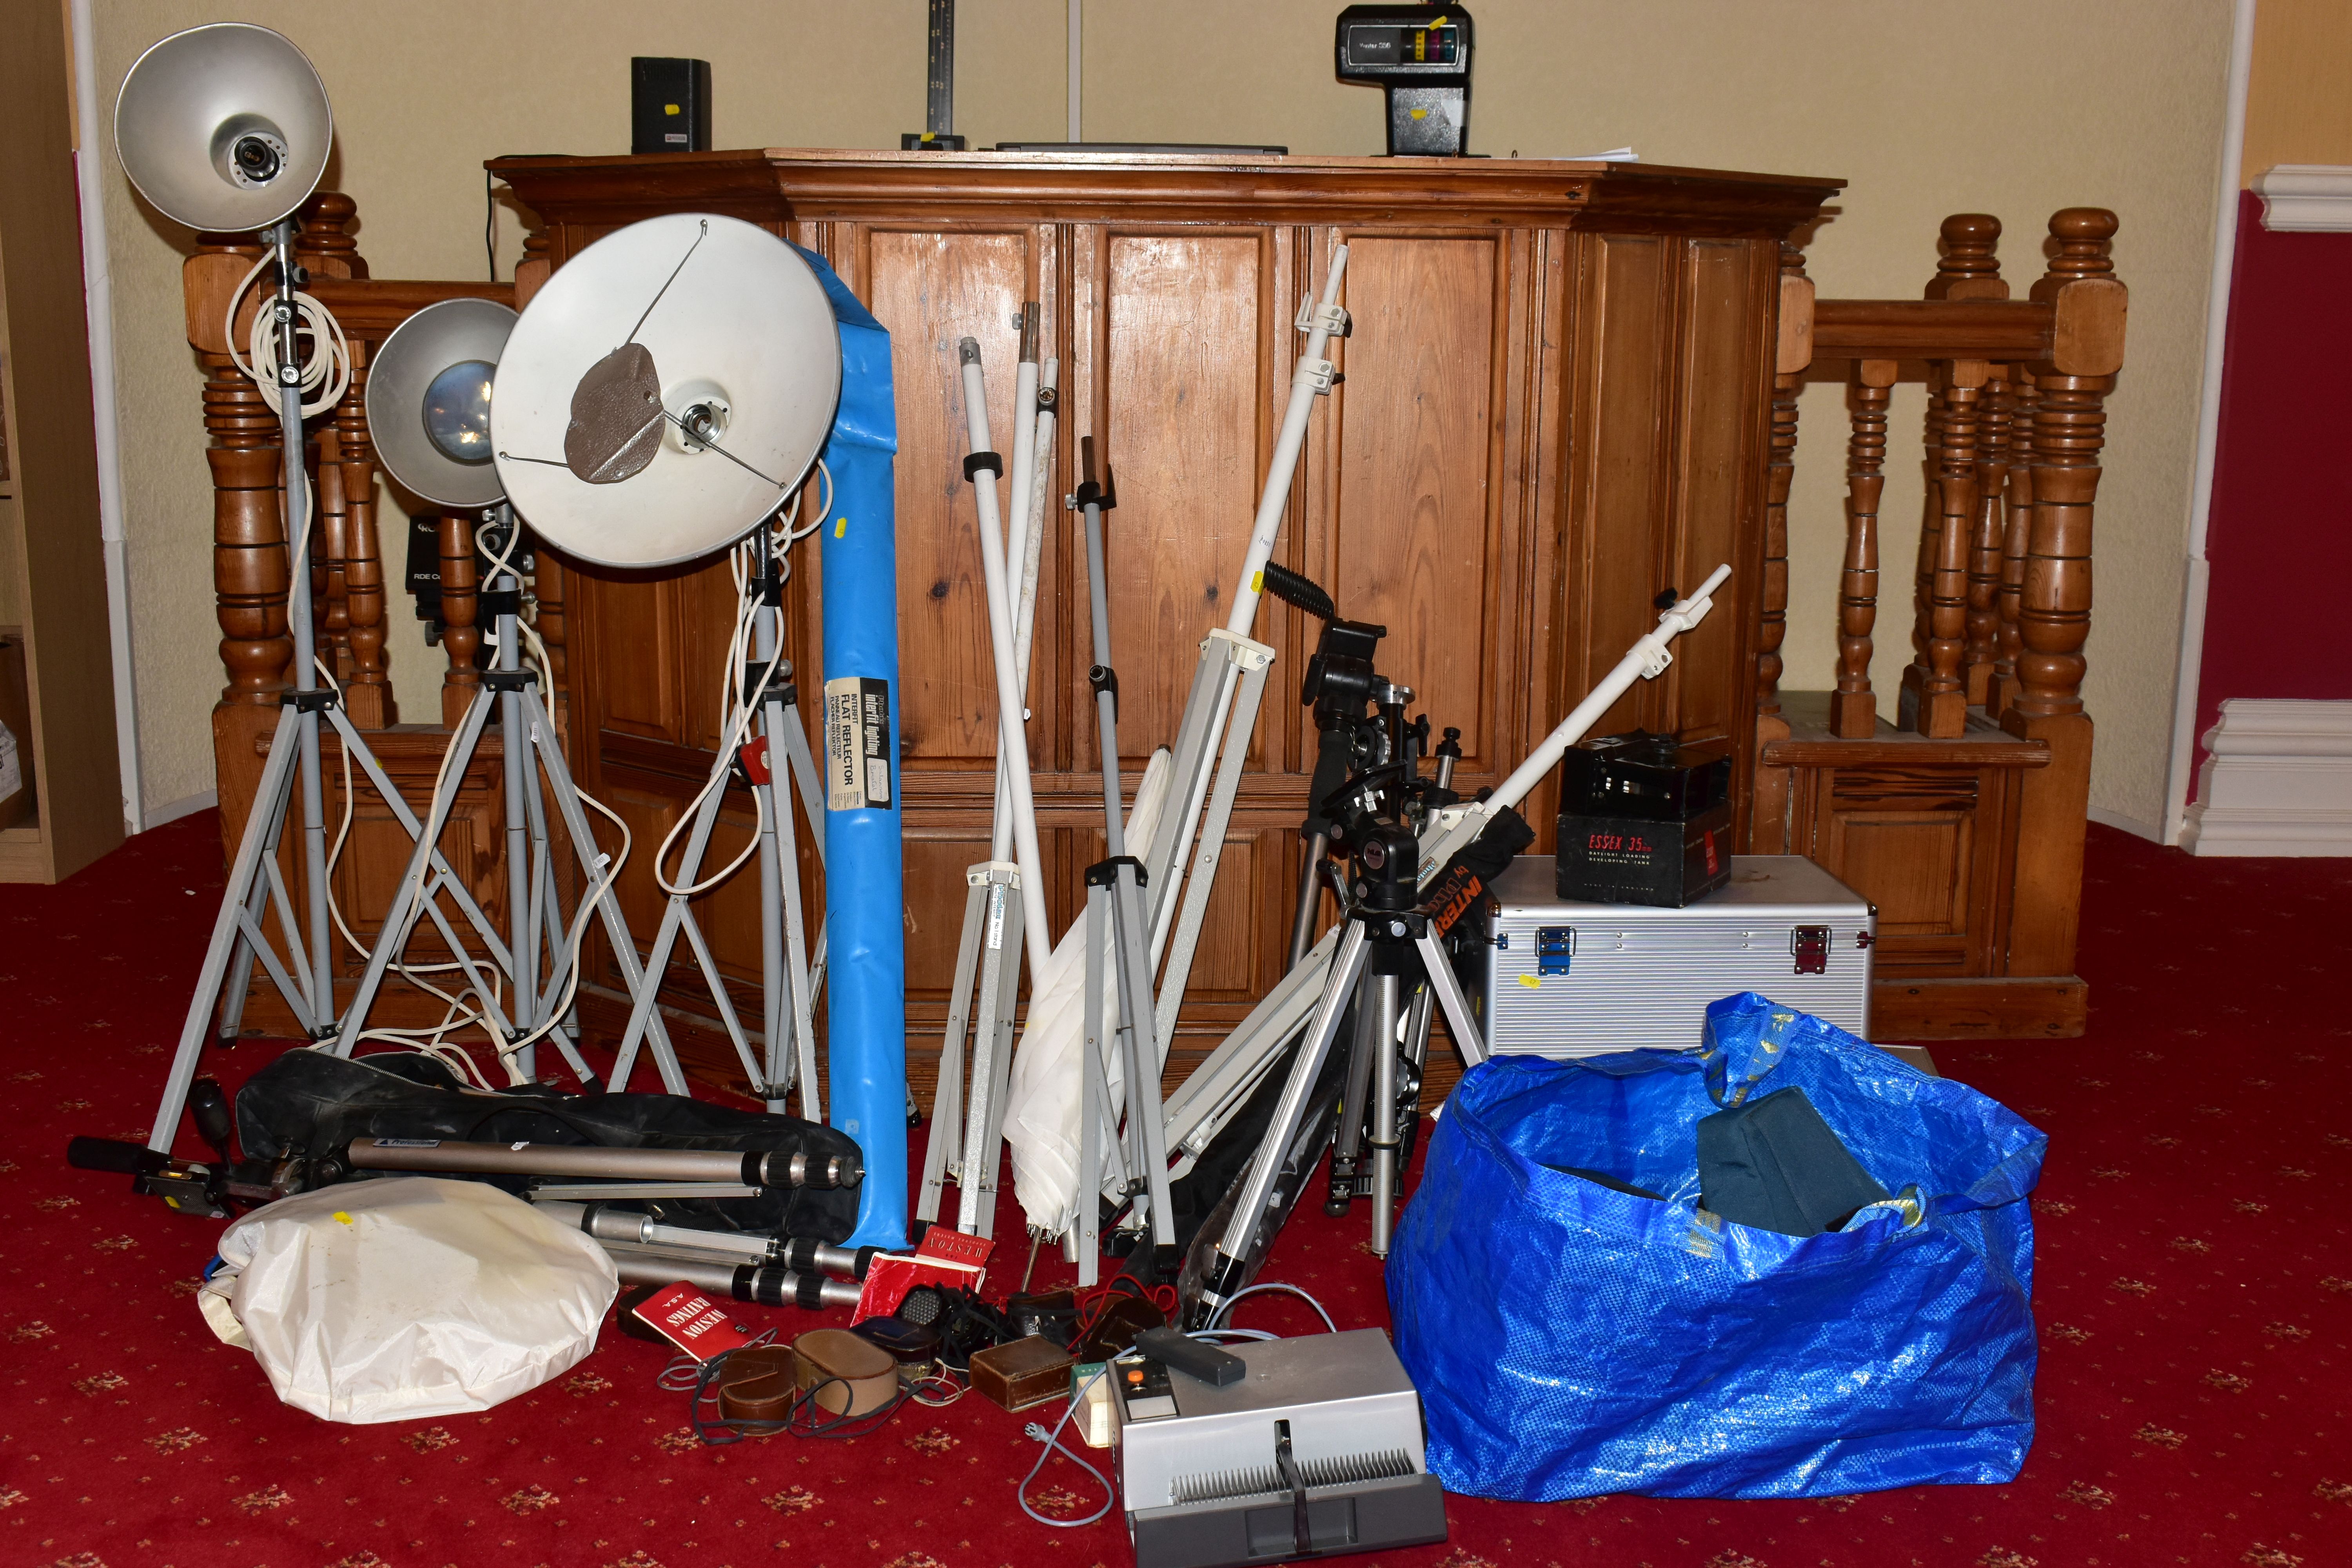 A QUANTITY OF TRIPODS AND LIGHTING STANDS including a Heiwa Professional , two Photax 9in Reflectors